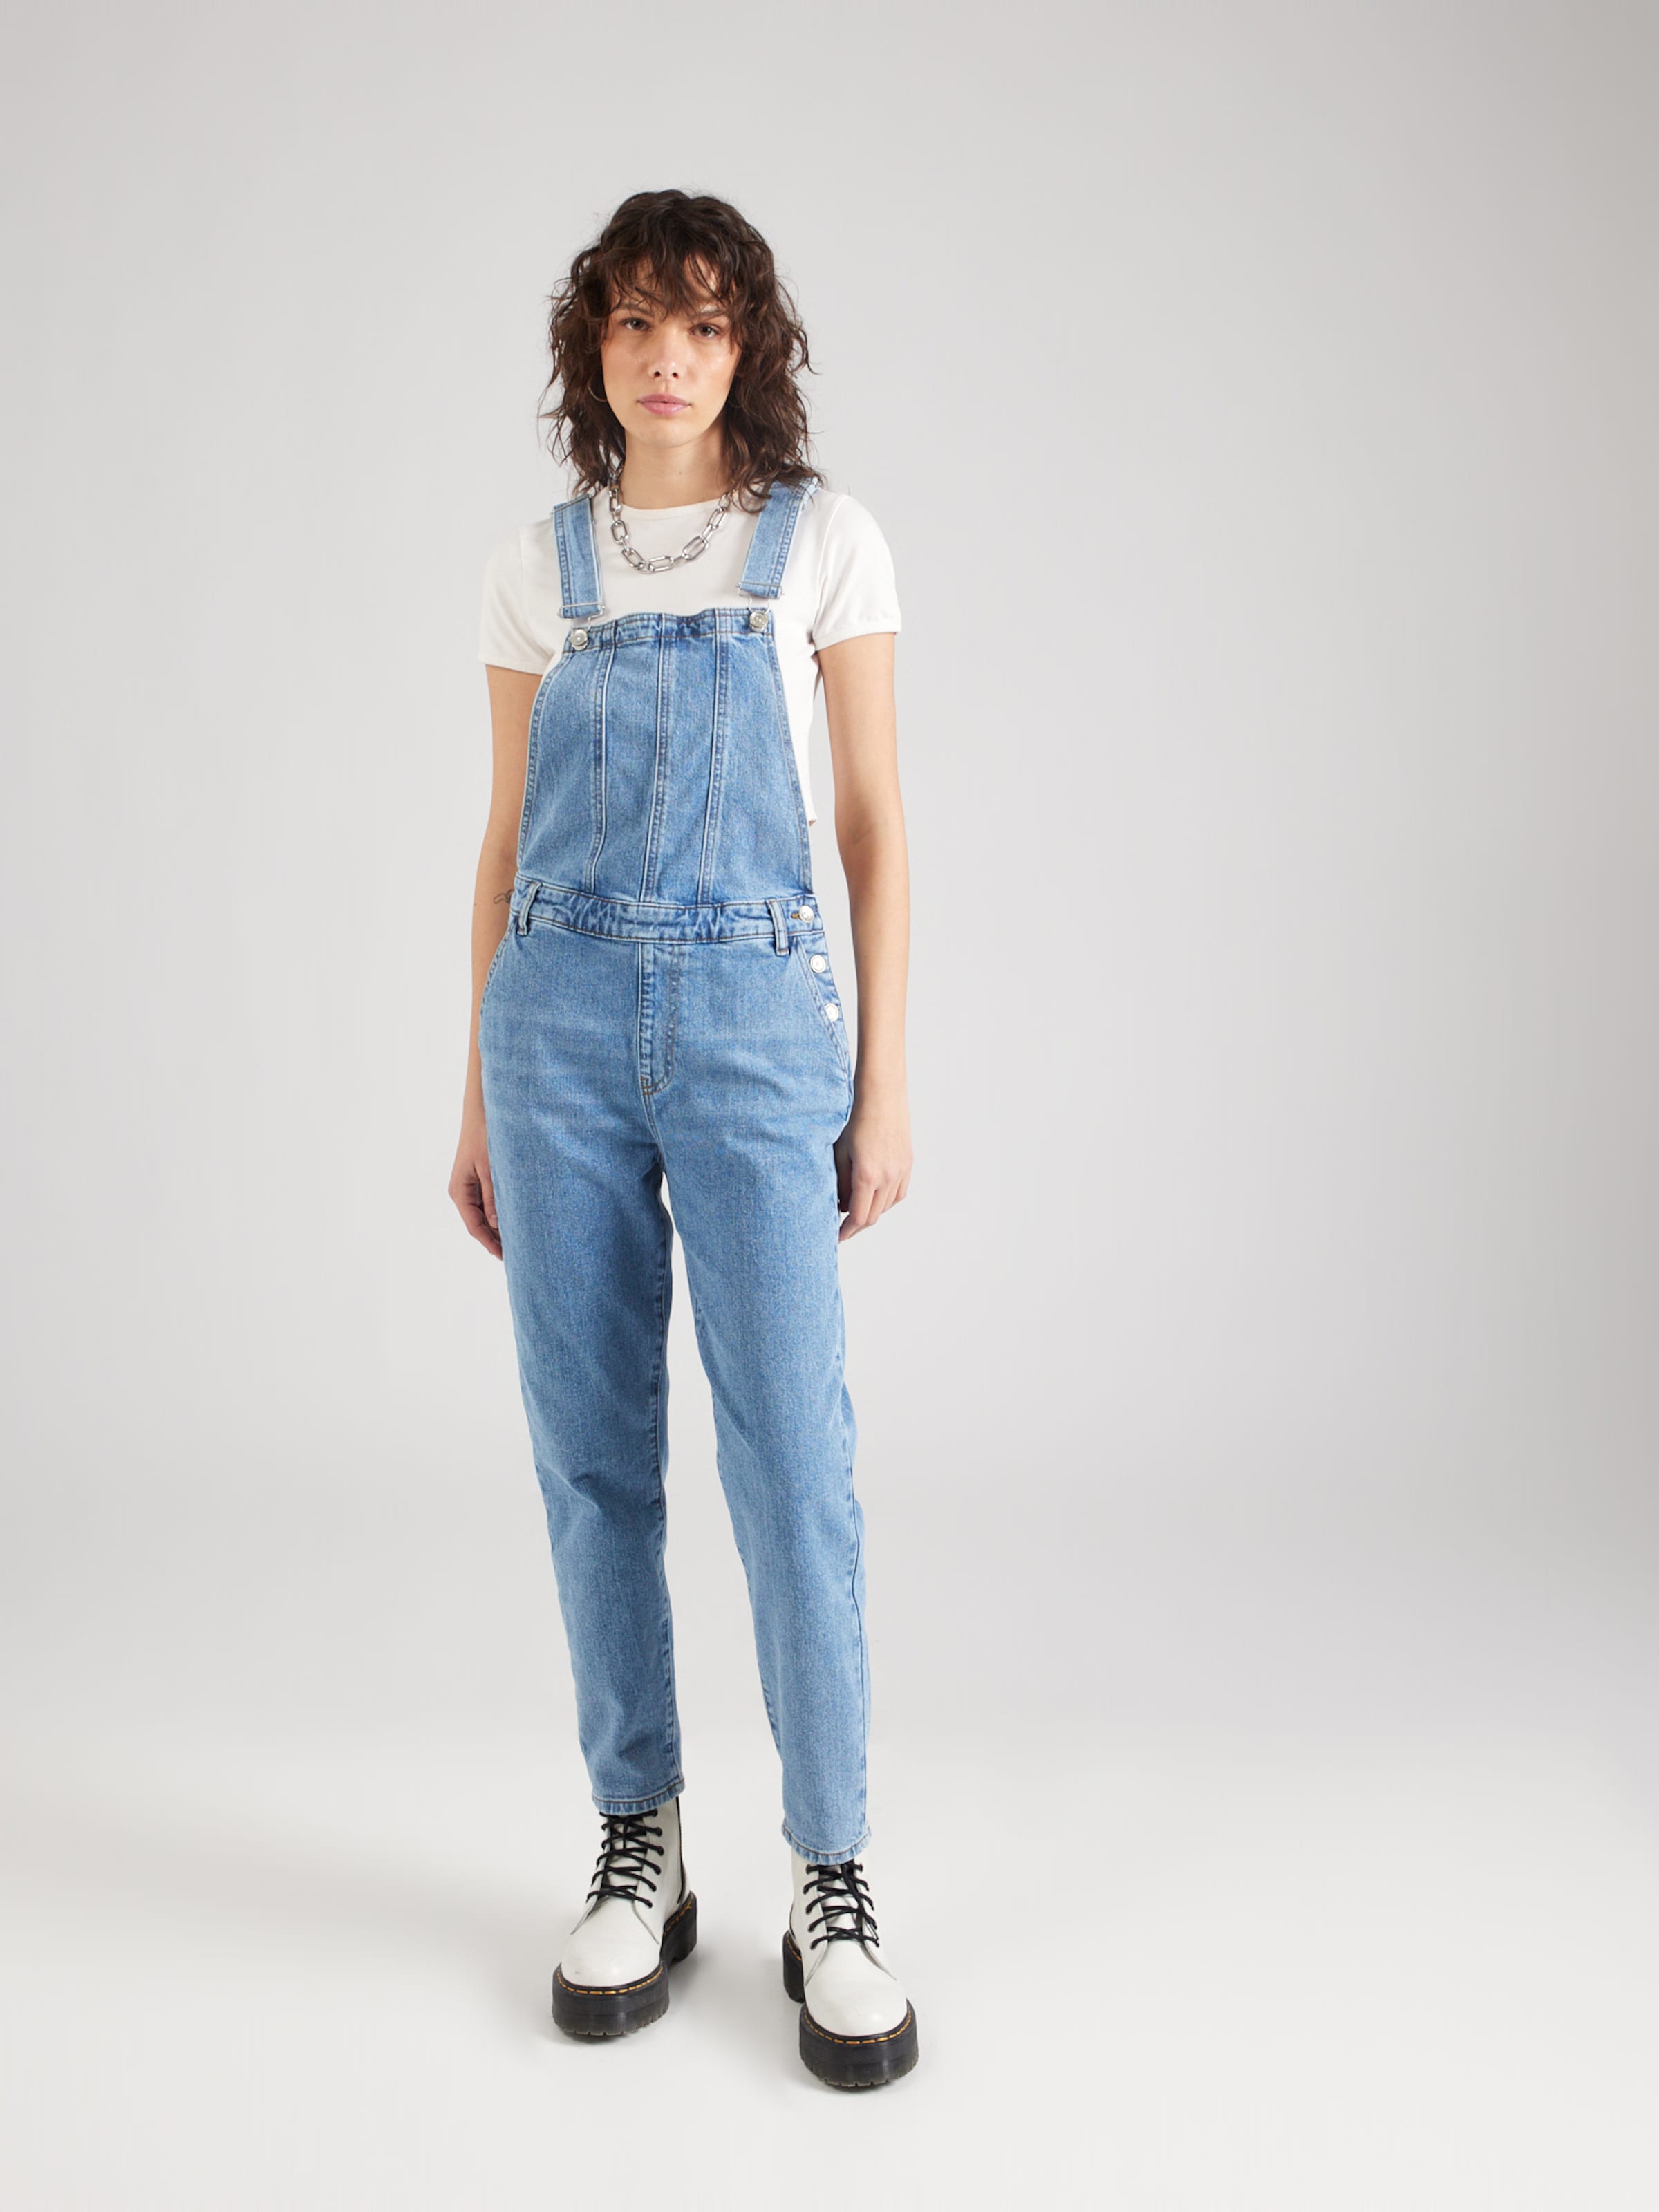 What Varieties of Dungarees Are There? | Dungarees Online